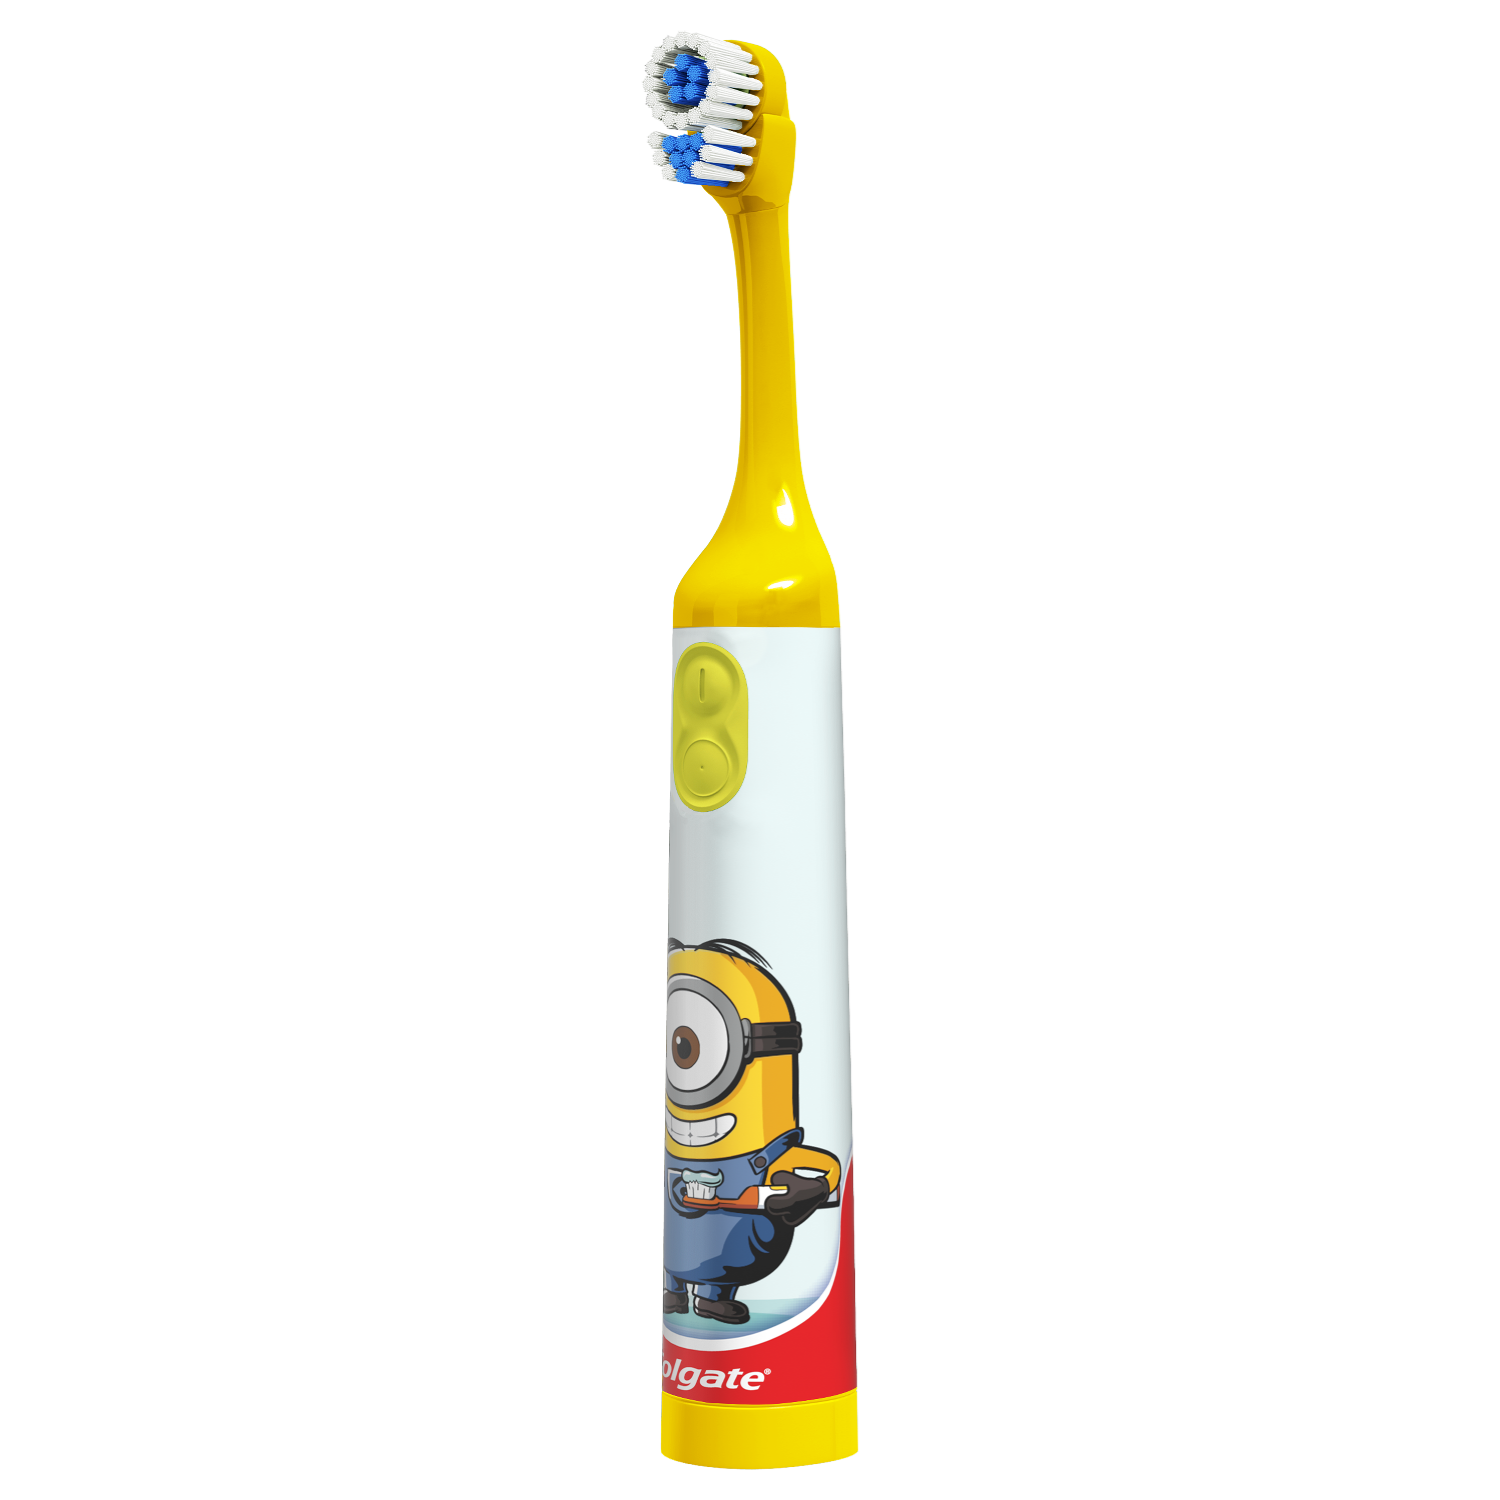 Colgate Kids Minions Battery Electric Toothbrush - image 3 of 5